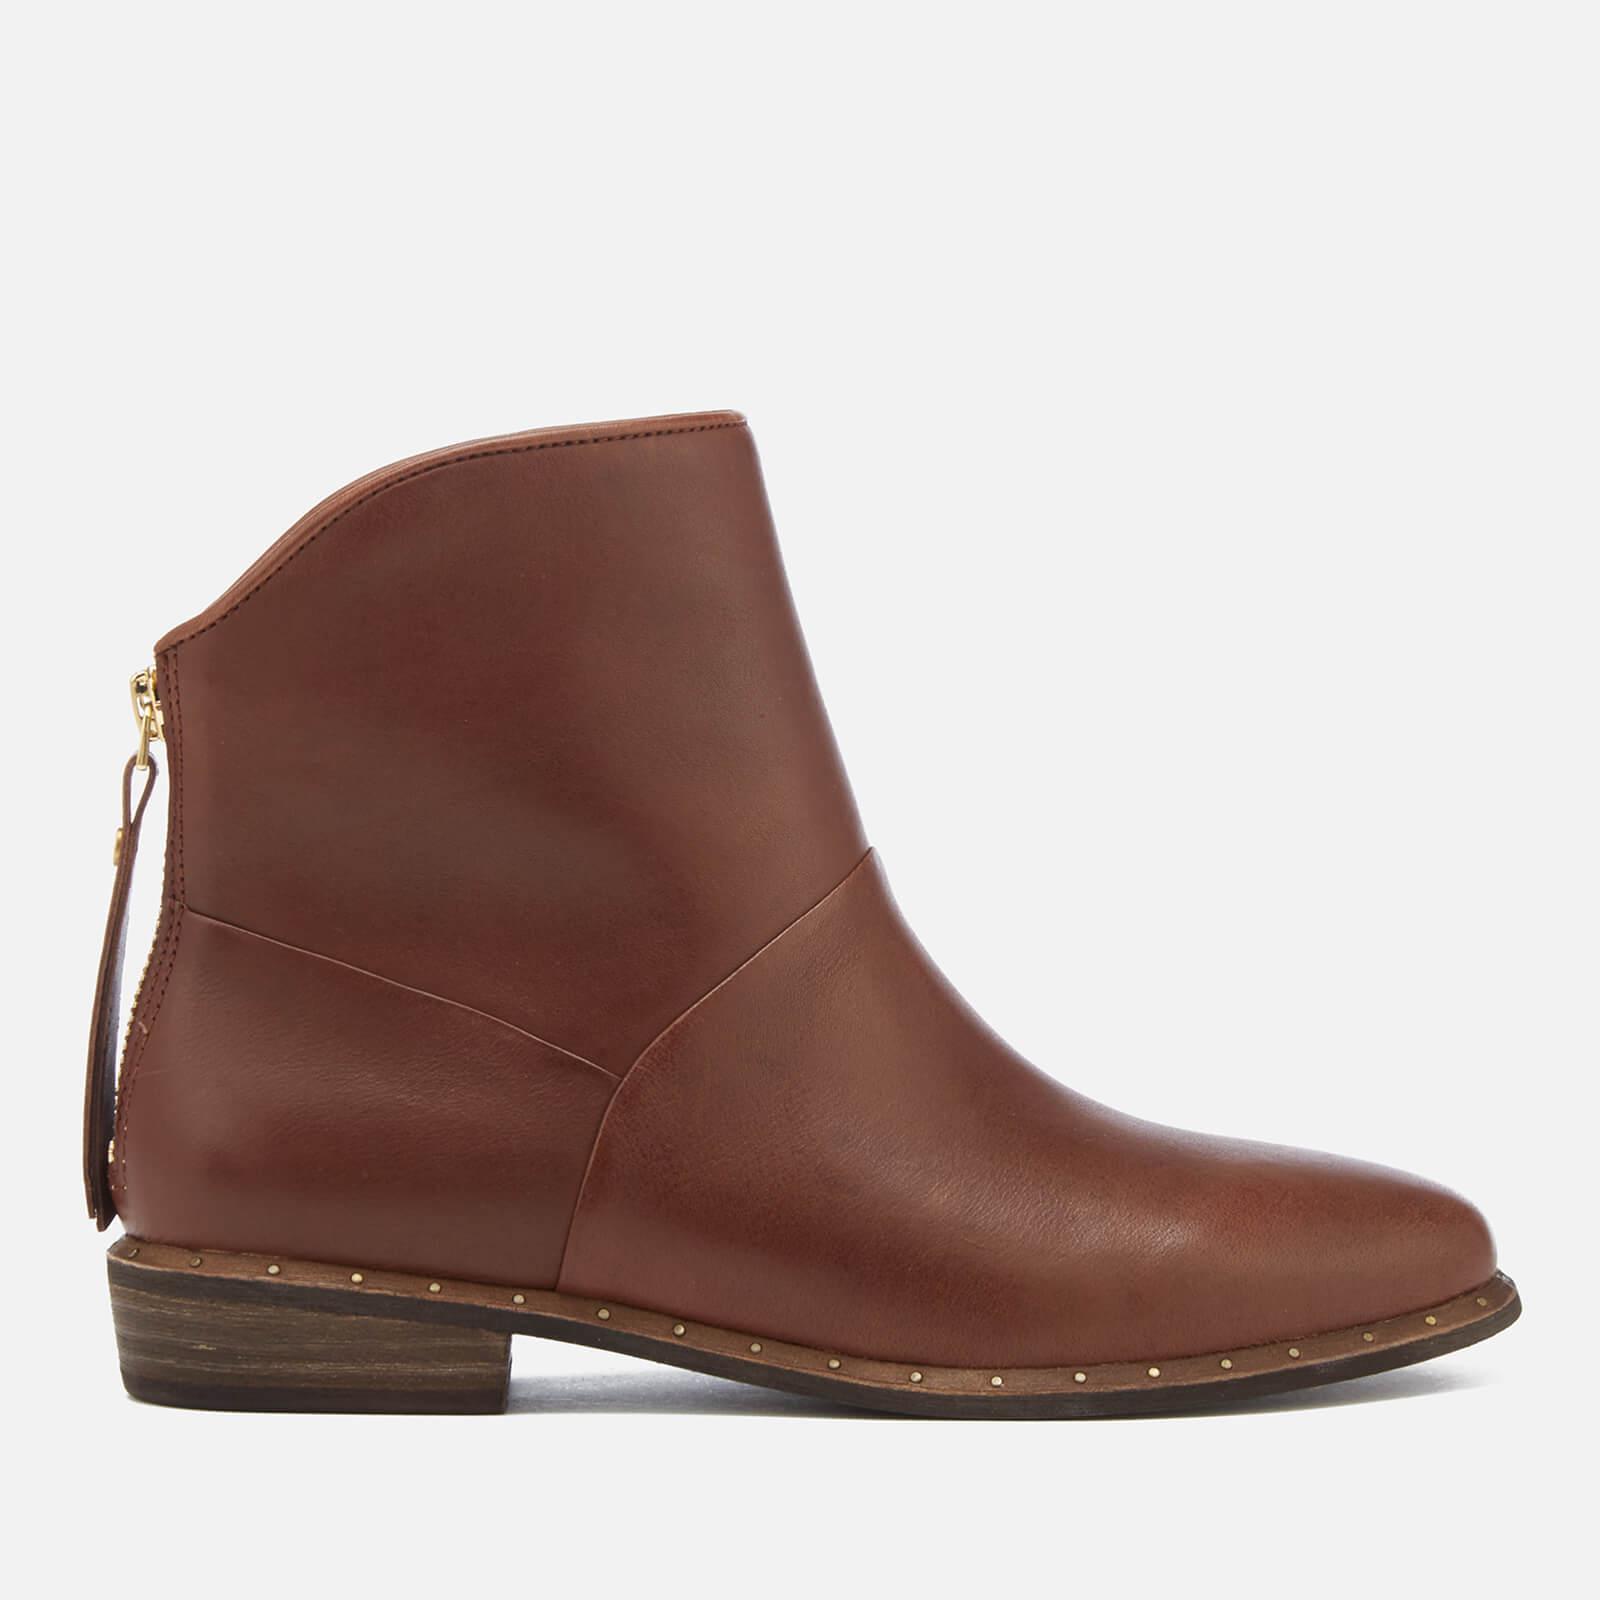 Lyst - Ugg Women's Bruno Leather Ankle Boots in Brown